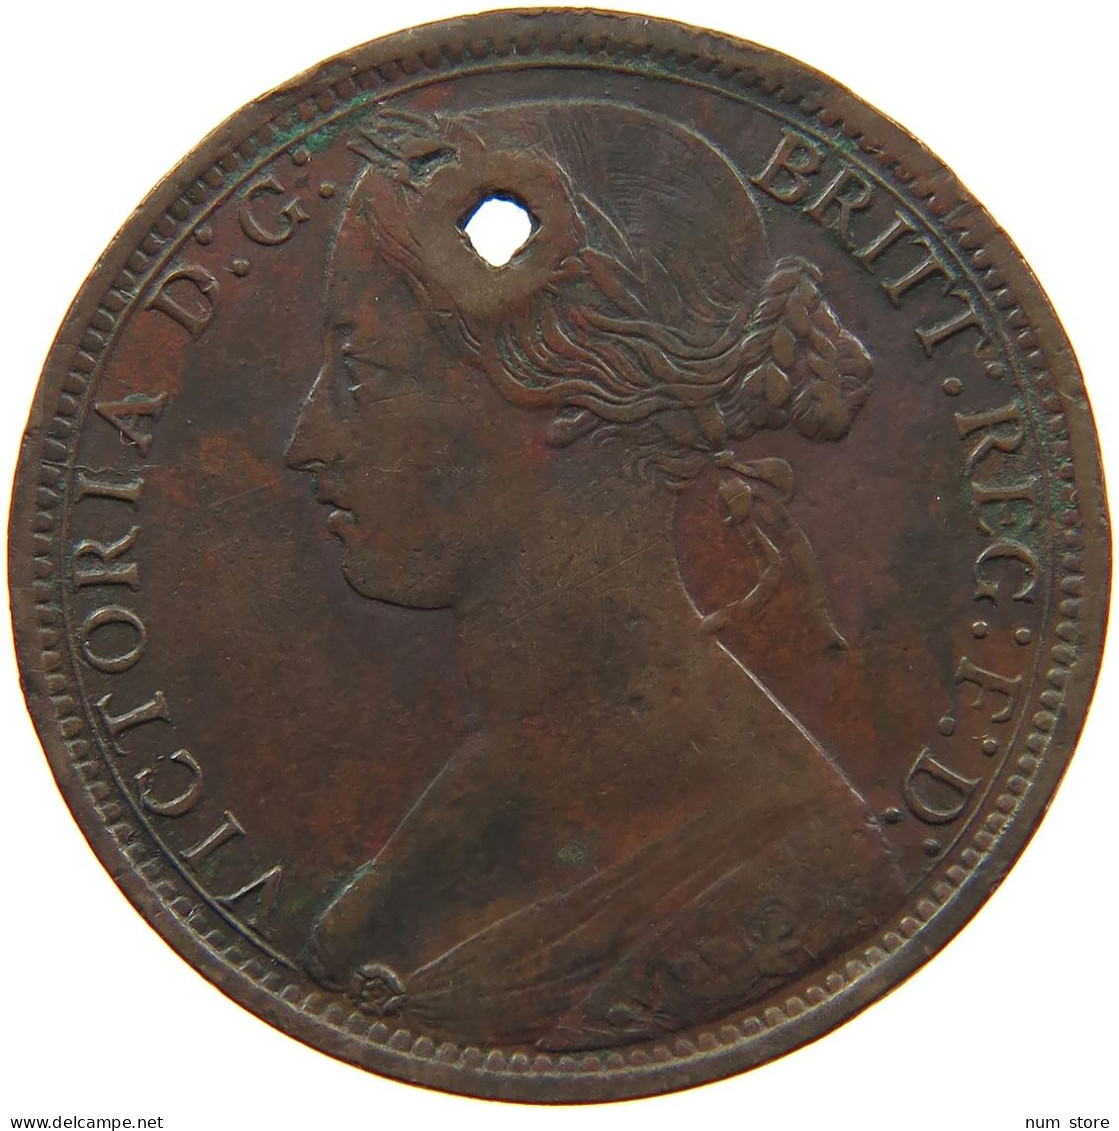 GREAT BRITAIN PENNY 1870 #s085 0039 - D. 1 Penny